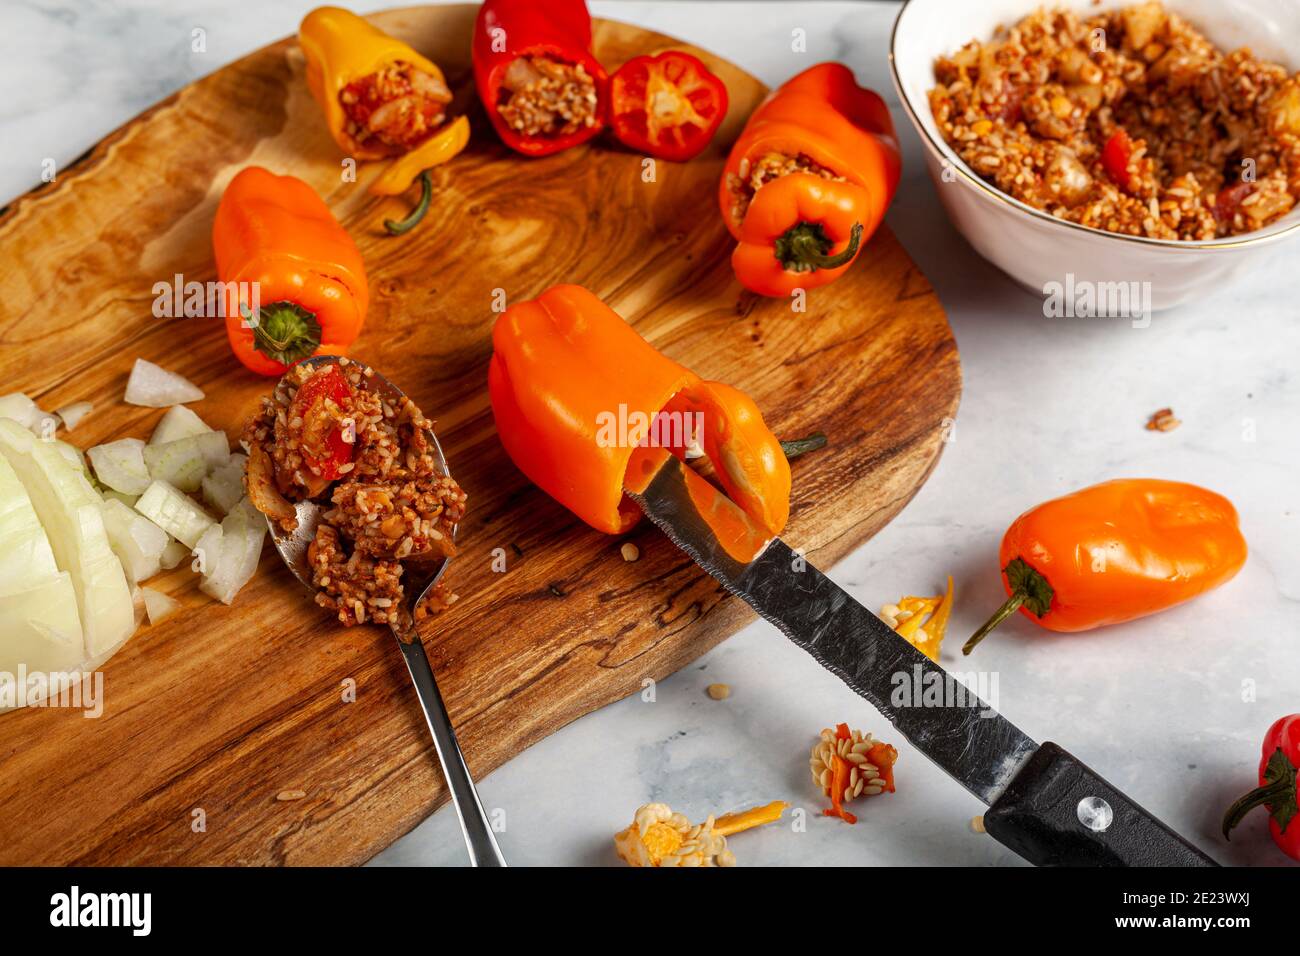 Making of stuffed peppers using colorful red orange and yellow peppers with seeds taken out with knife and filling made with rice, meat, diced onion, Stock Photo